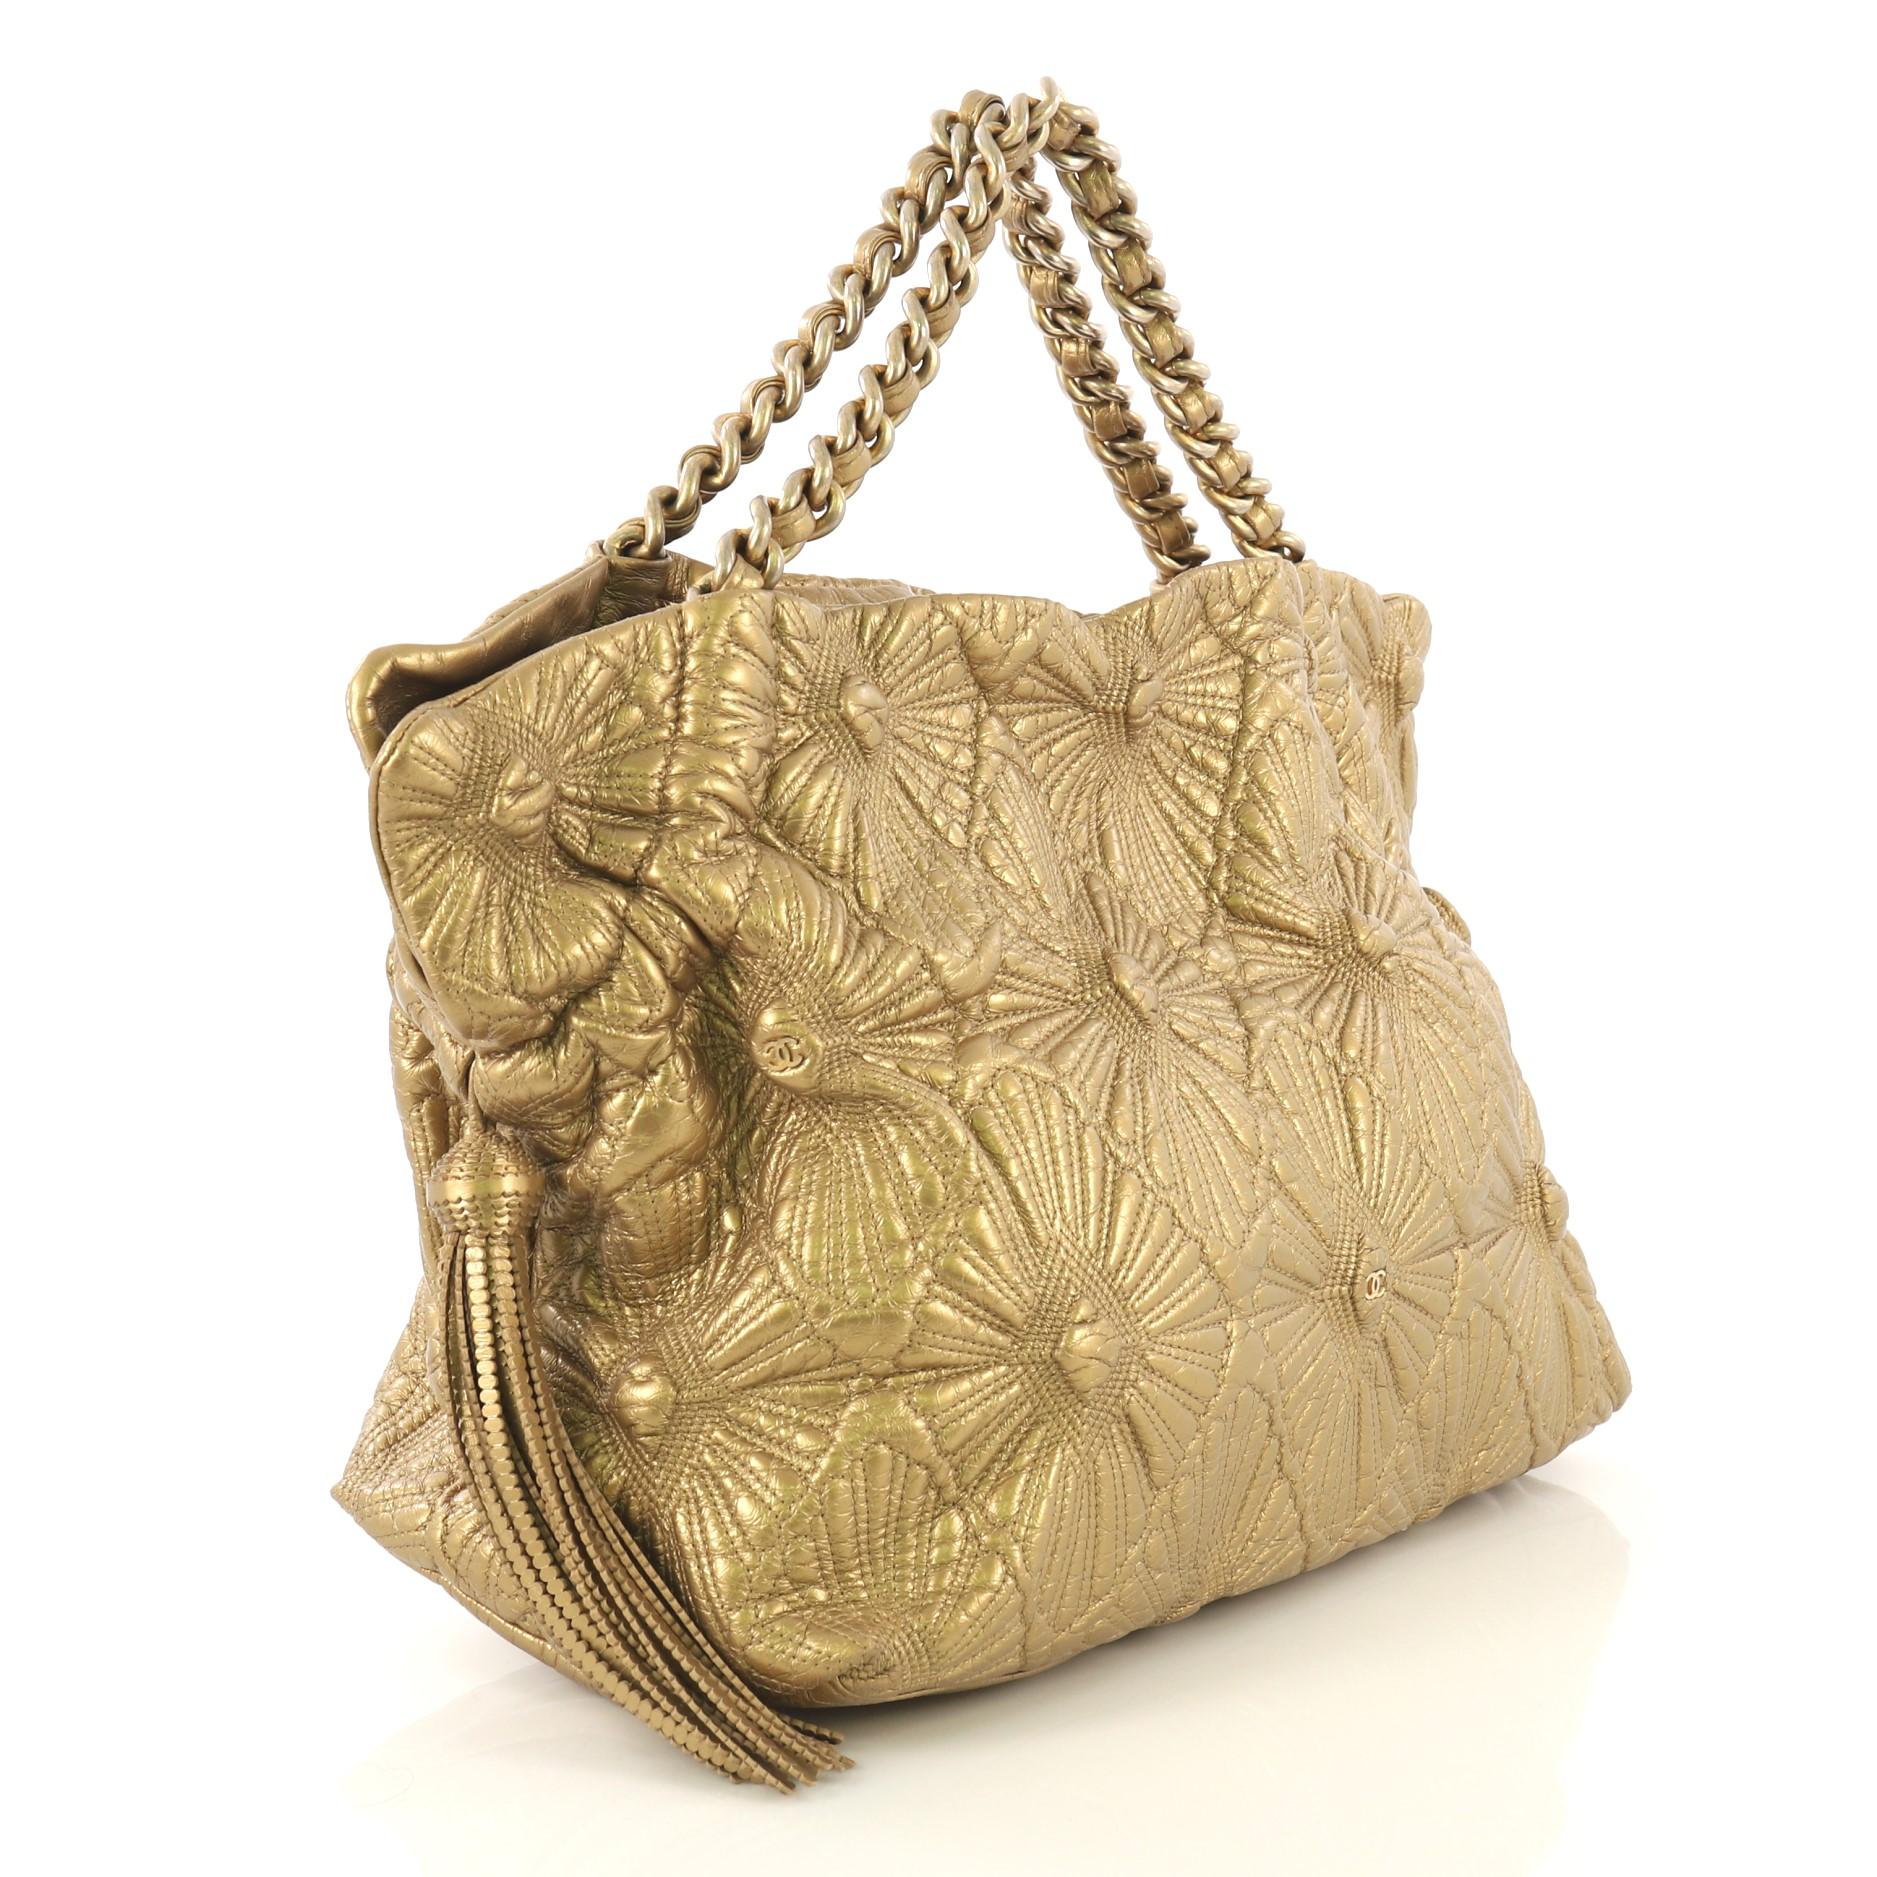 This Chanel Ca D'Oro Tote Quilted Lambskin Large, crafted from gold metallic quilted lambskin, features dual woven-in leather chain handles, side tassels, floral embroidery design, and gold-tone hardware. Its magnetic snap closure opens to a tan